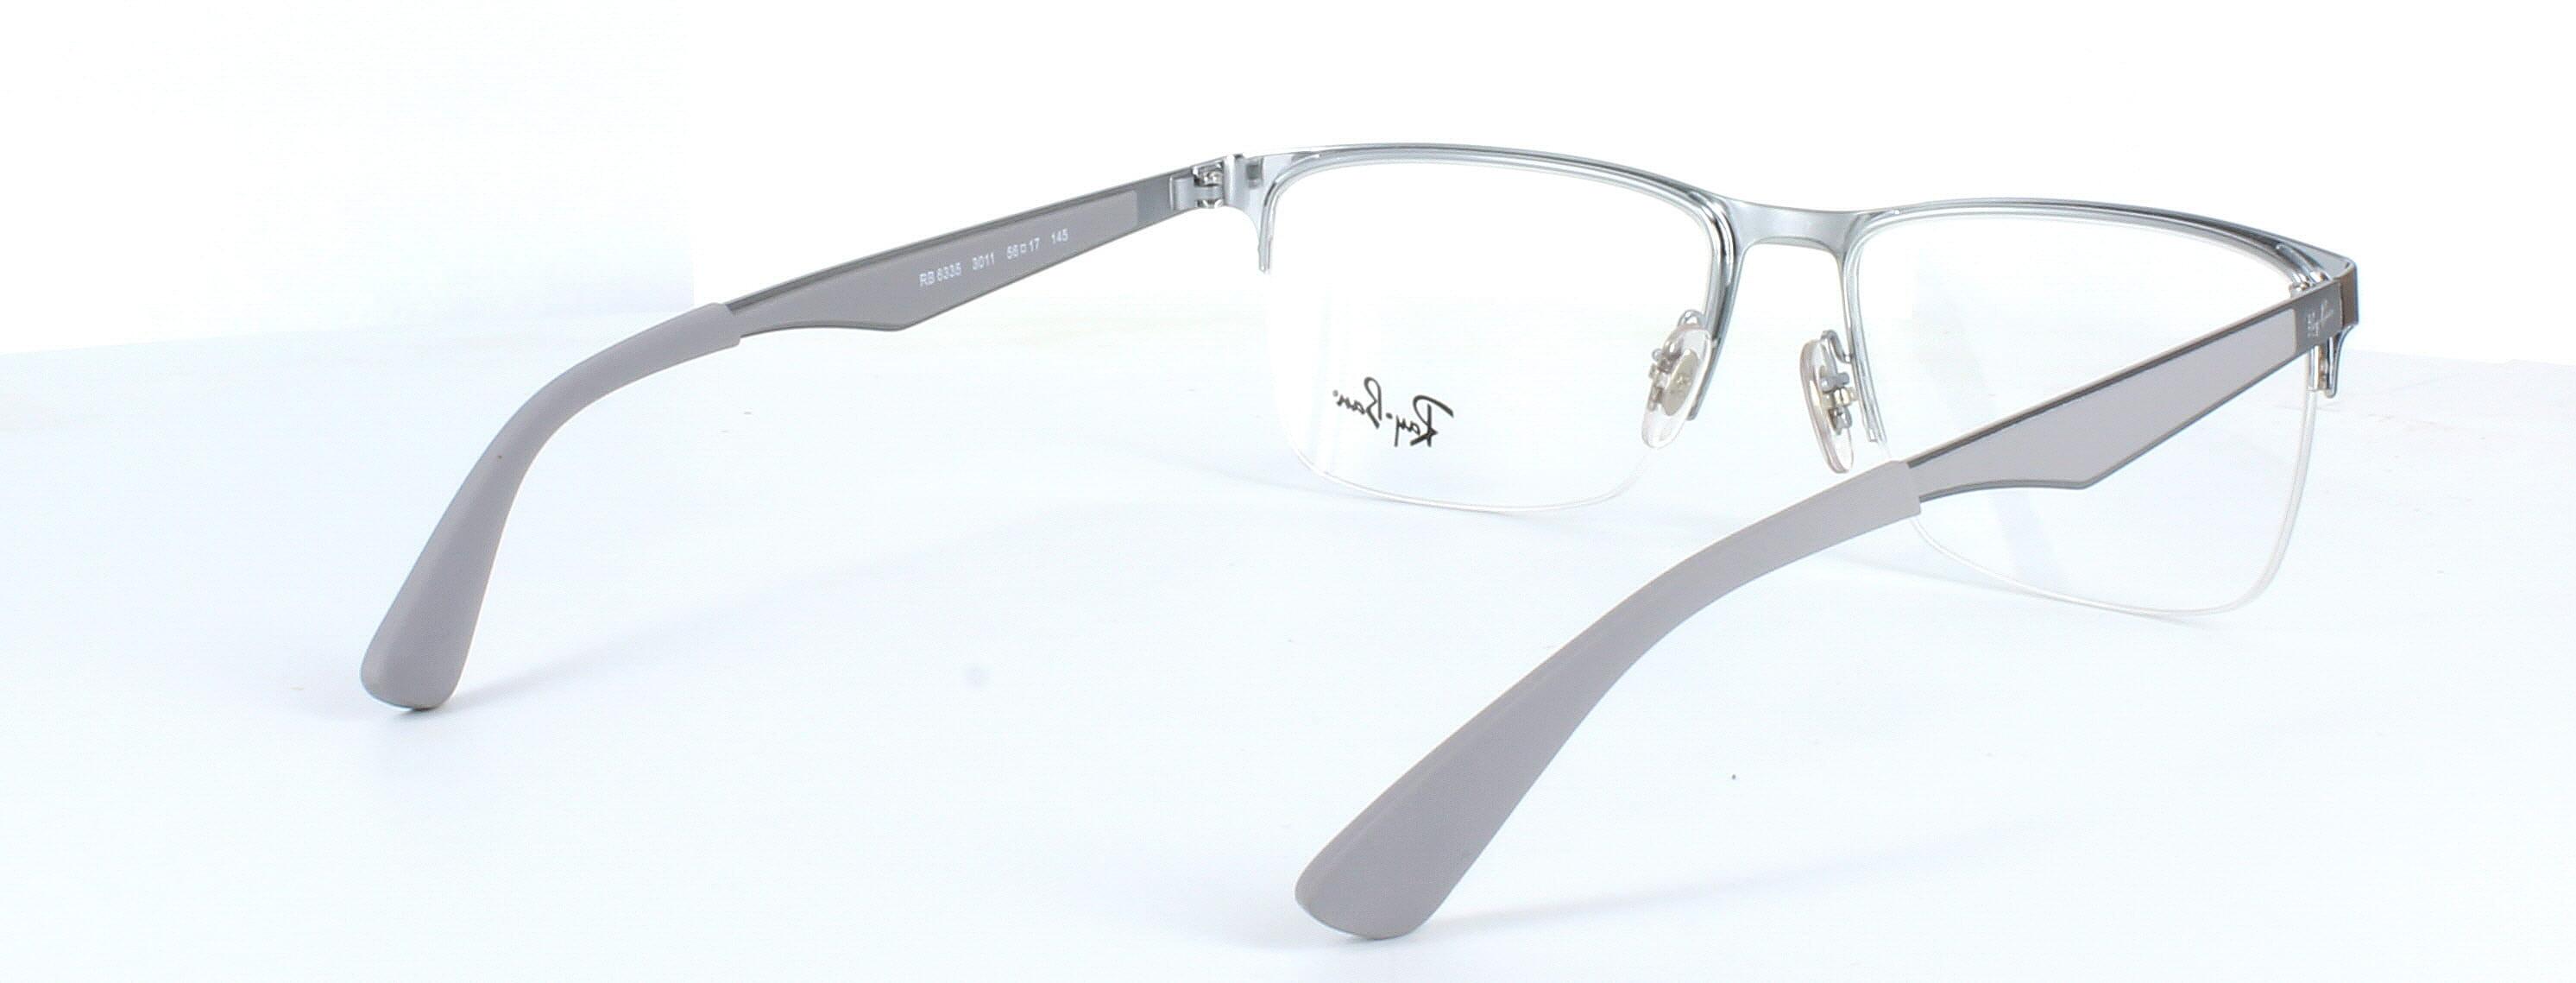 Gents semi-rimless glasses in bronze by Ray Ban - RB6335 - image 5